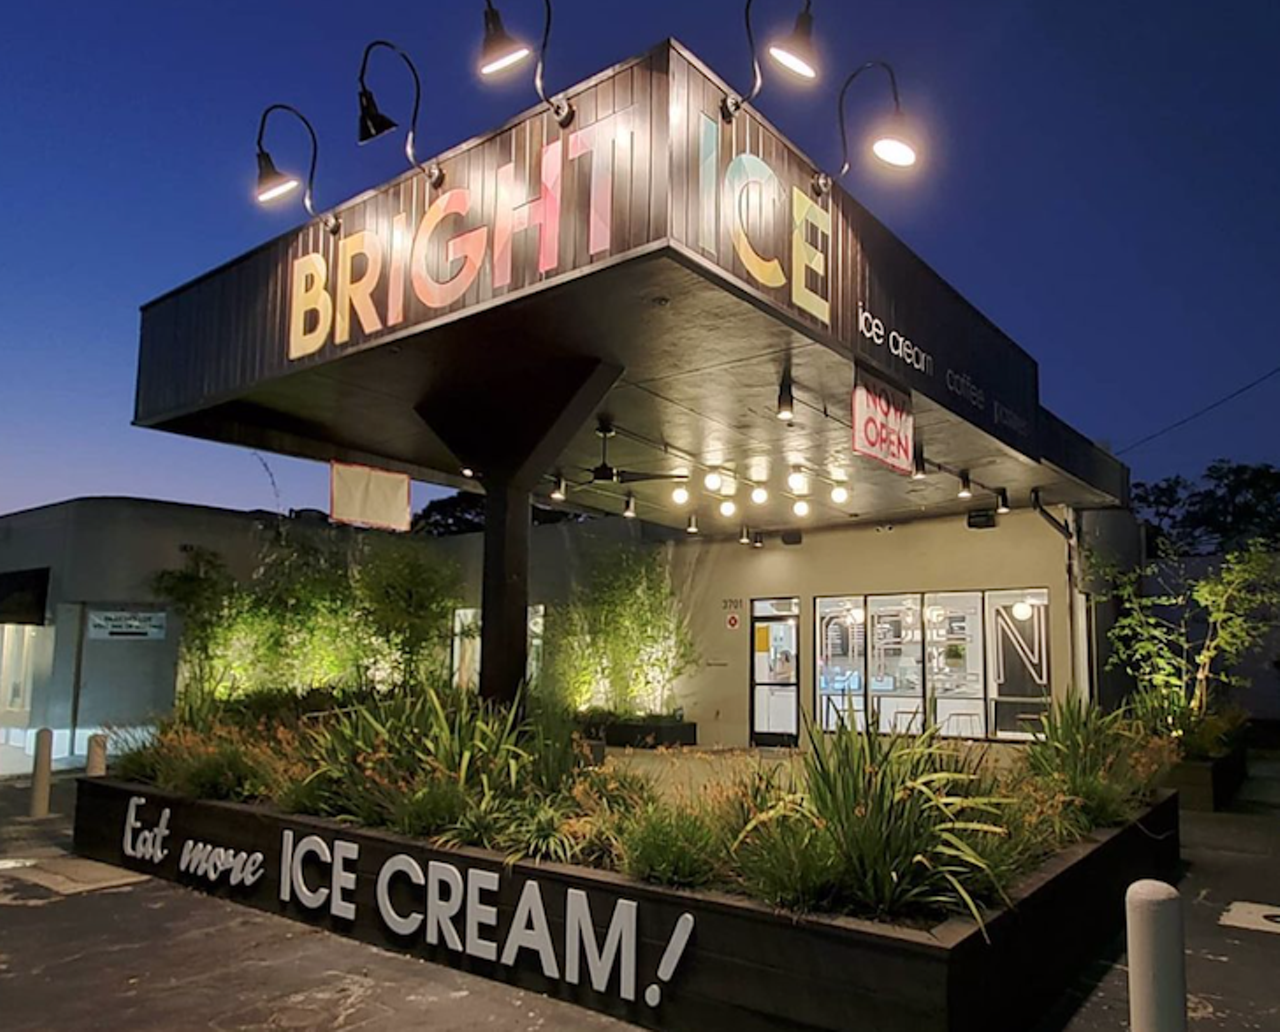 Bright Ice
5591 Park Blvd, Pinellas Park
The popular St. Pete Bright Ice started scooping up ice cream bowls and cones in Pinellas Park February. With 15 flavors, the shop&#146;s got some interesting ones like lemon with crystalized ginger, vegan options like blueberry with cinamon and classics like warm vanilla. 
Photo via Bright Ice/Instagram